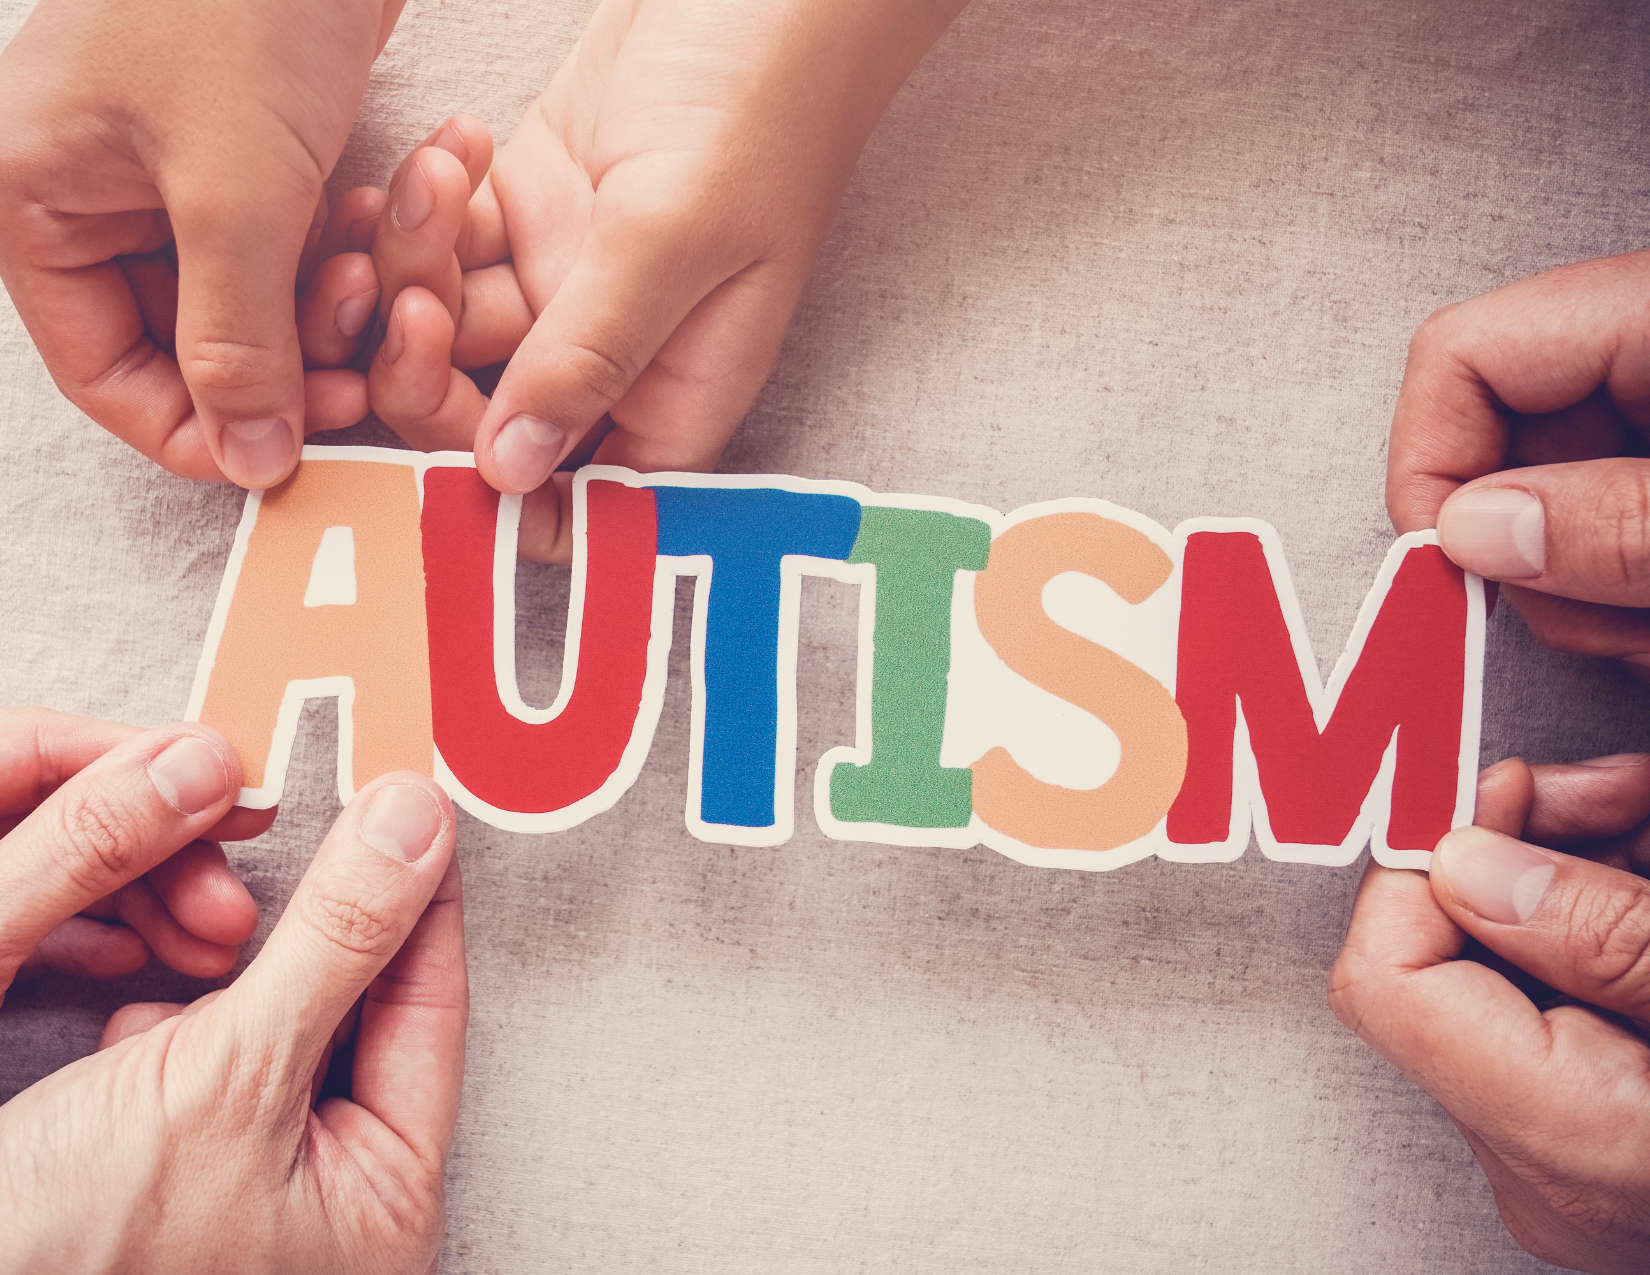 The word Autism is spelled out in colorful letters with three sets of hands helping hold a piece.